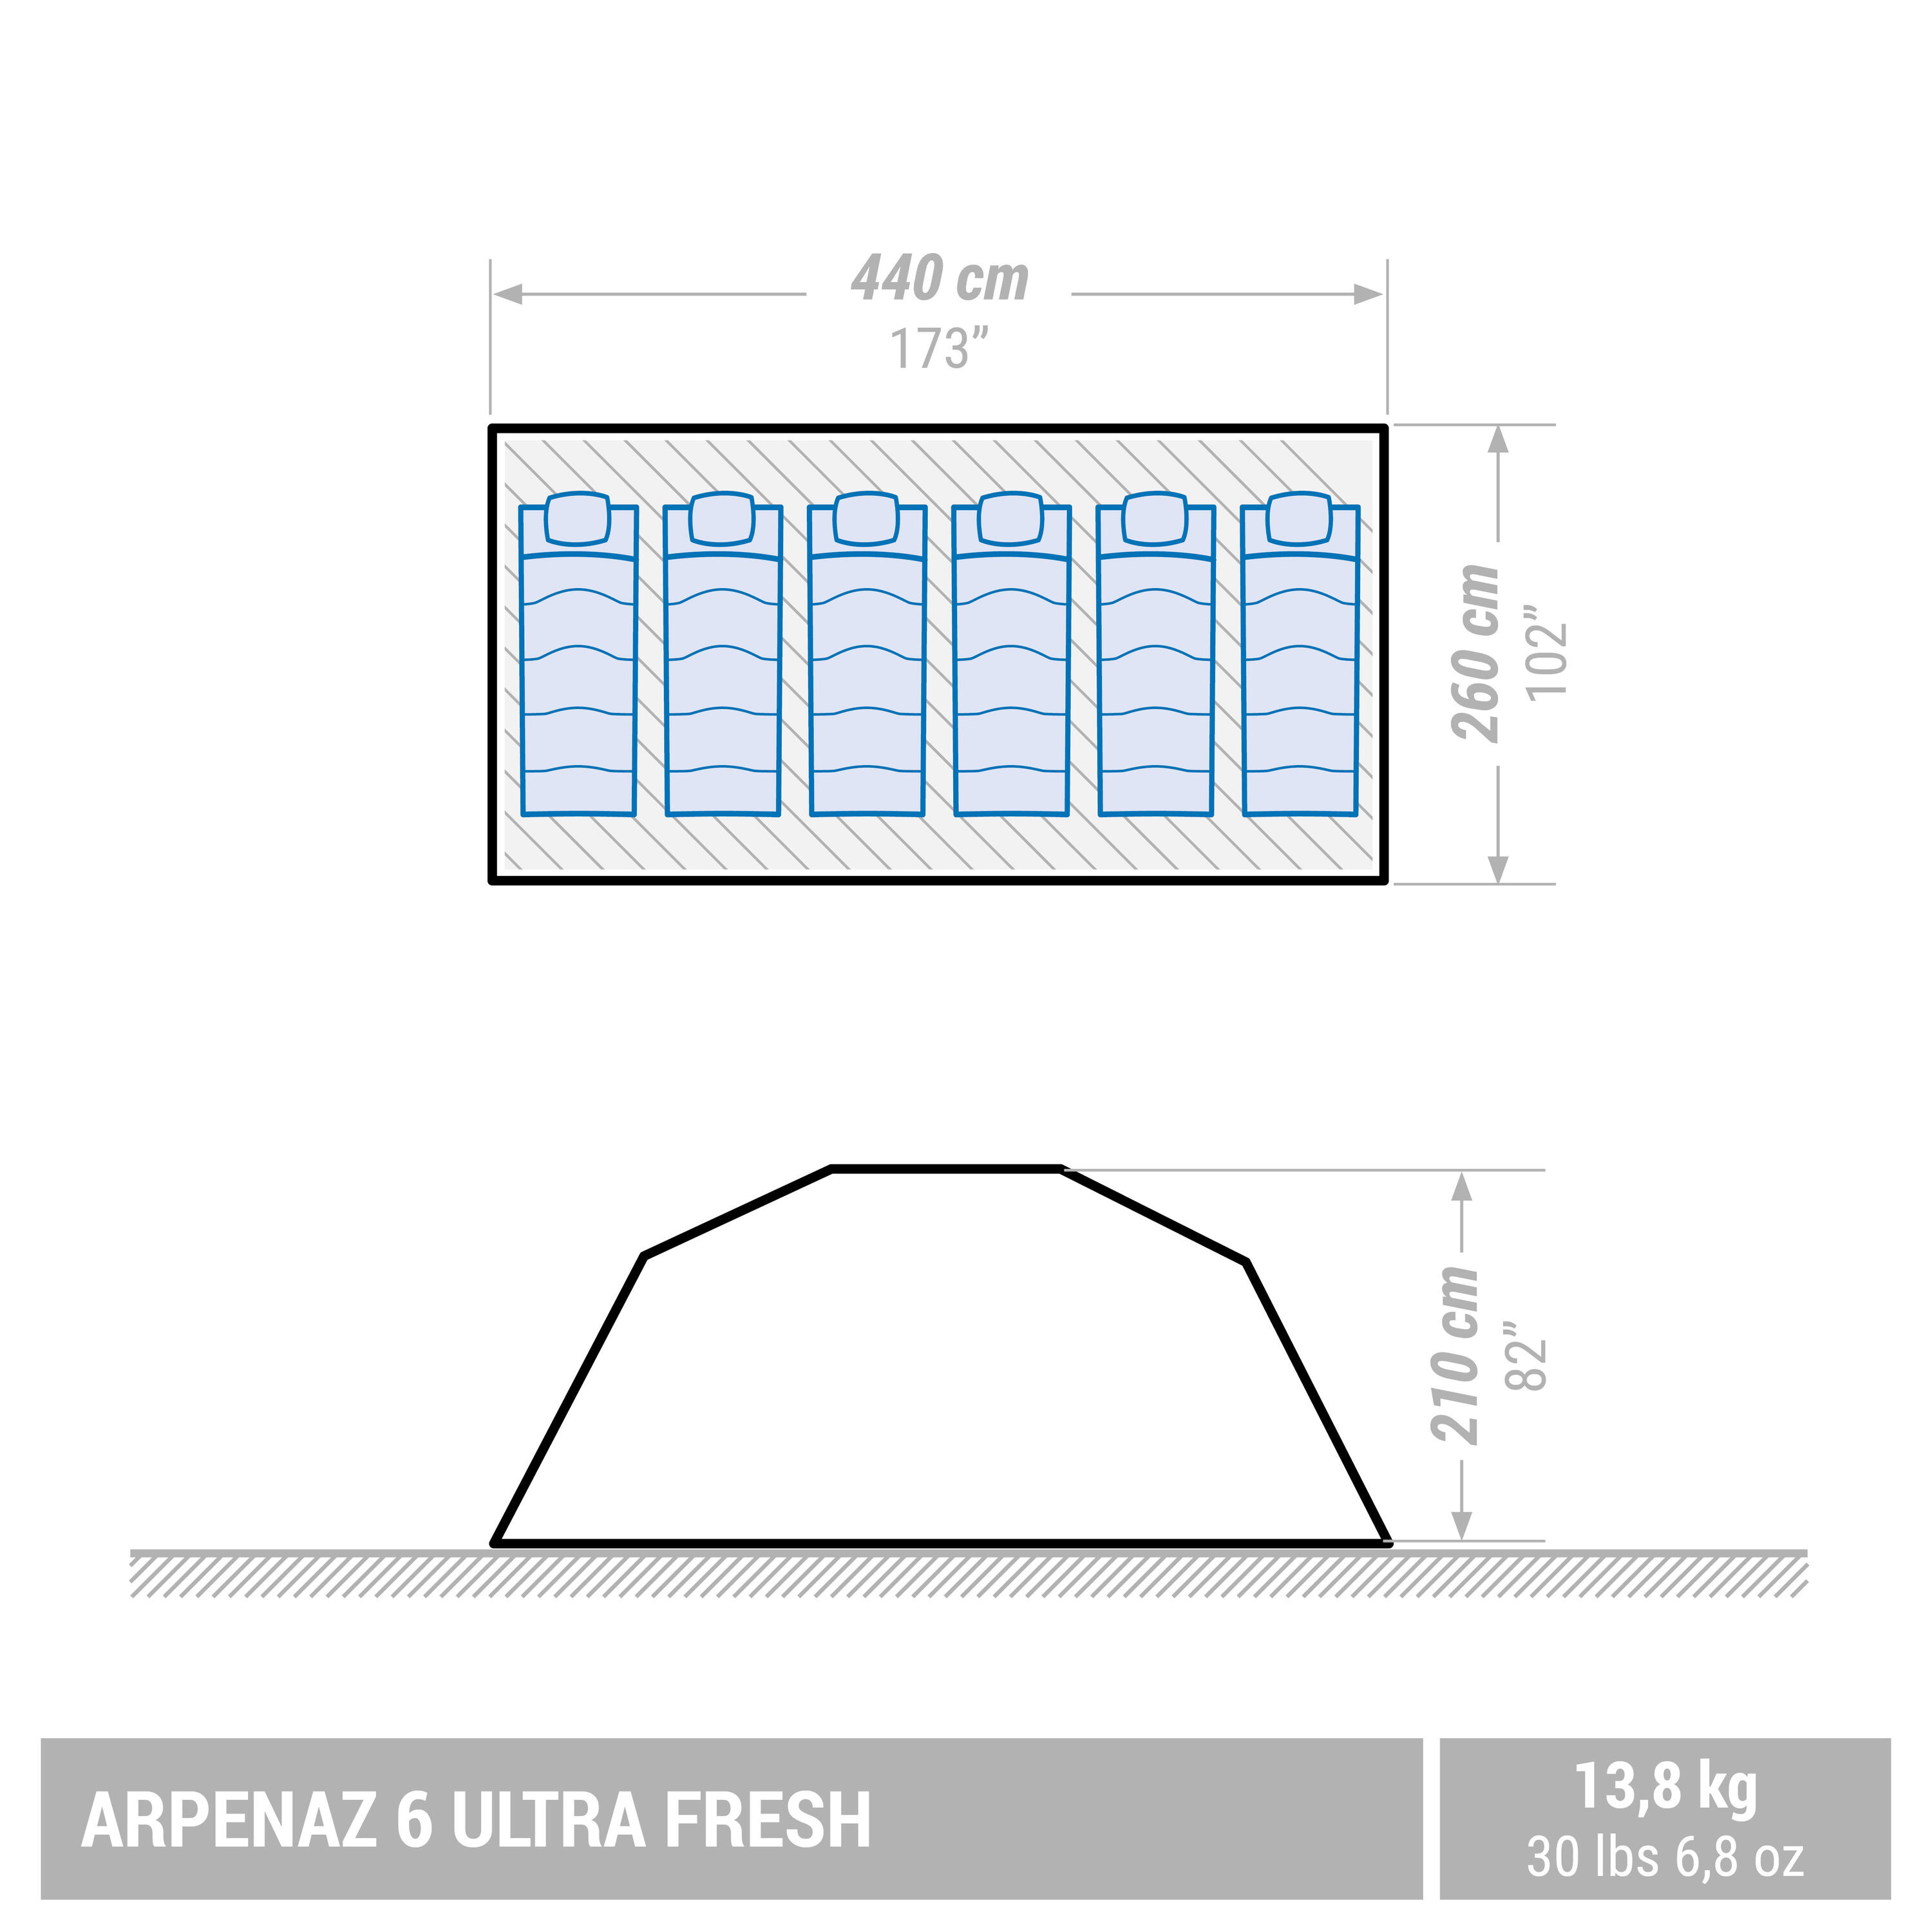 Camping tent with poles - Arpenaz 6 ULTRAFRESH - 6 Person 4/19